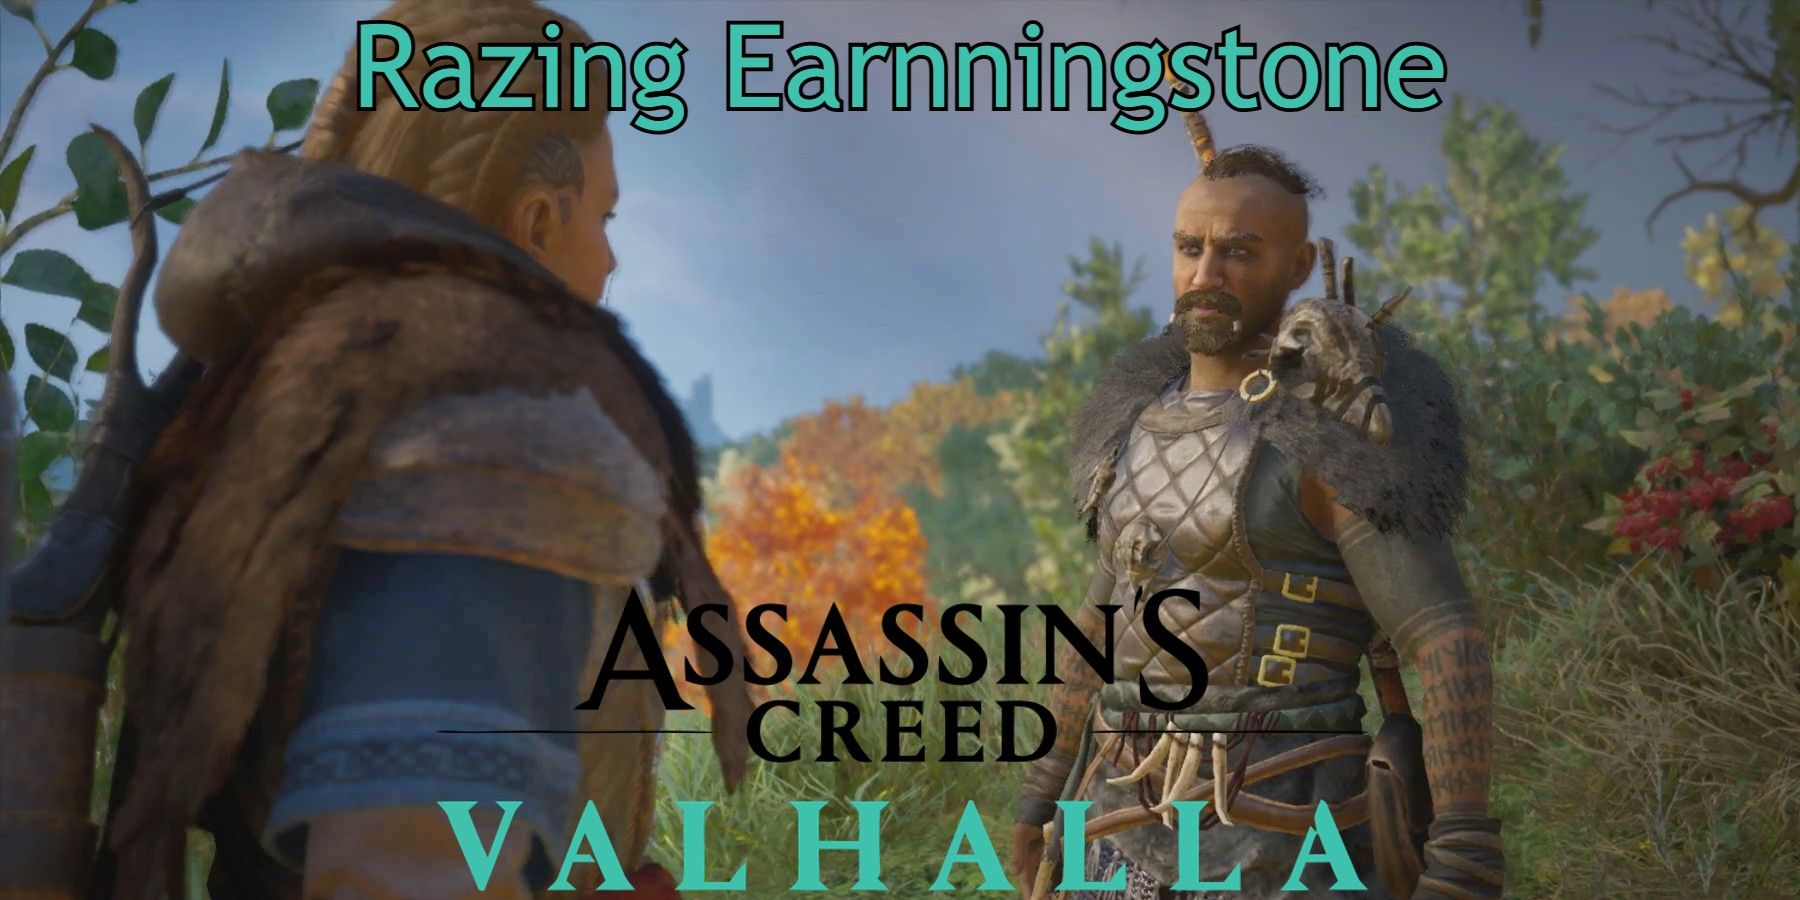 Assassin's Creed Valhalla earns praise from critics for its open